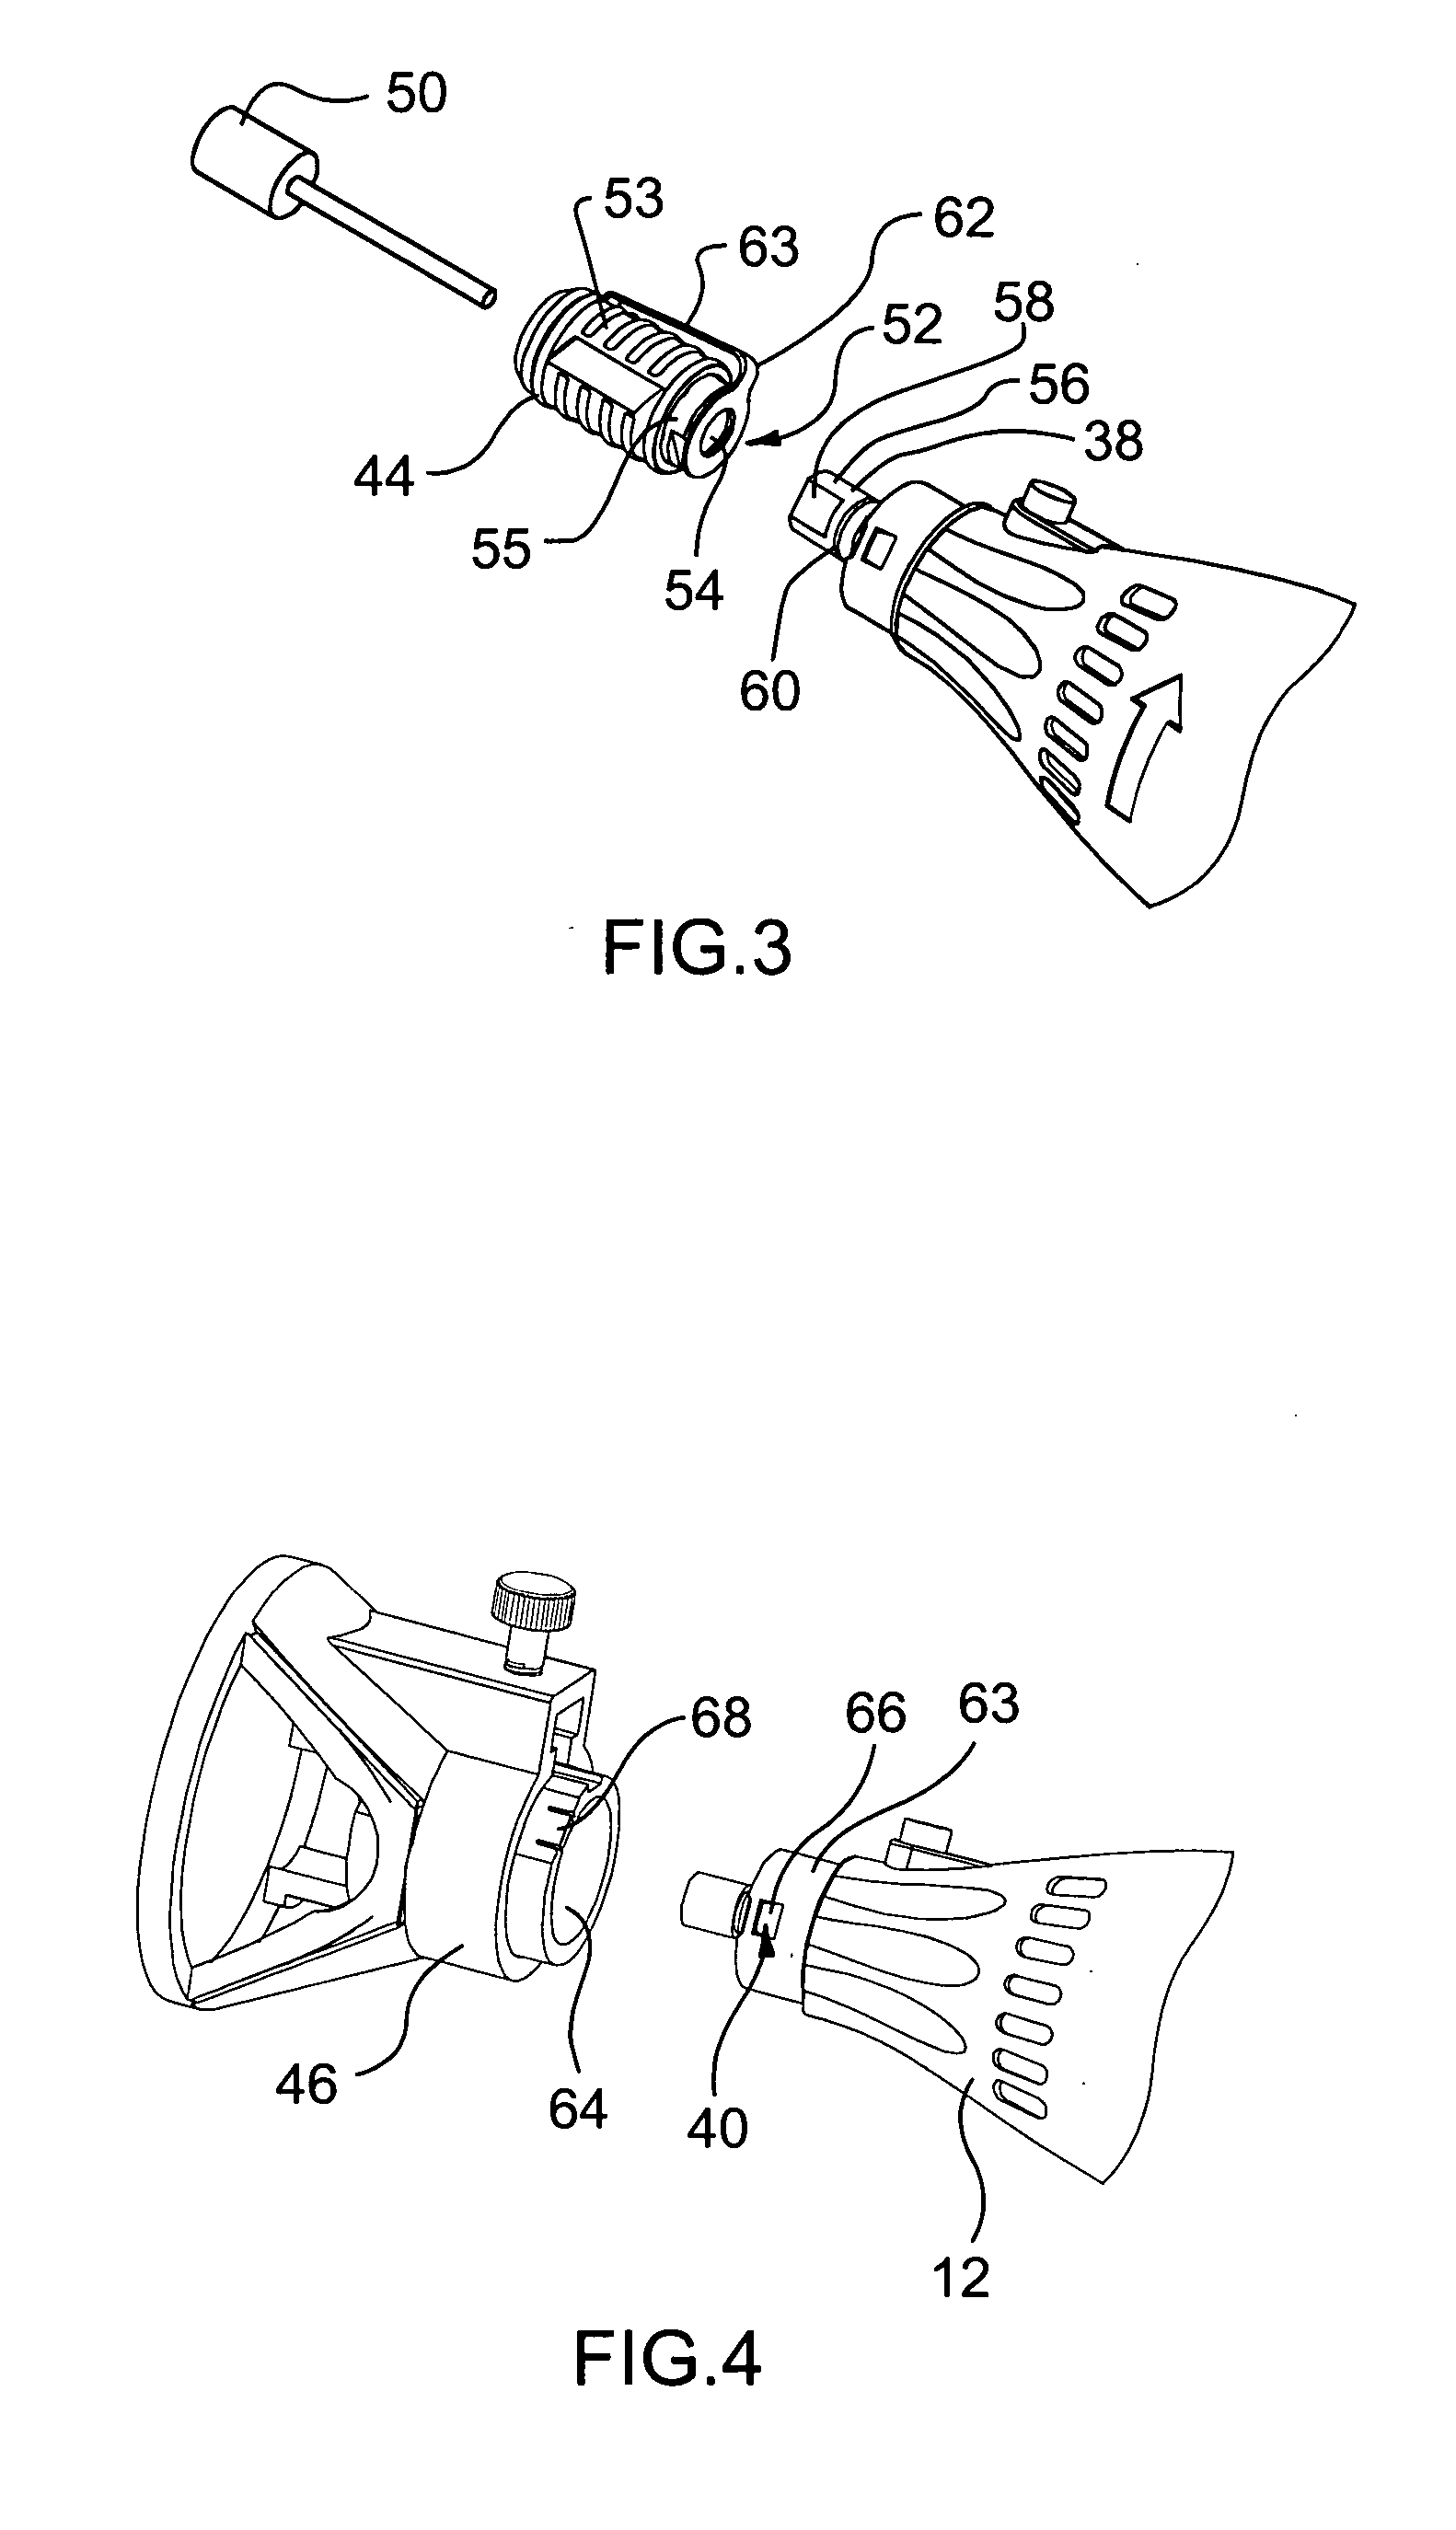 Rotary tool with quick connect means and attachments thereto